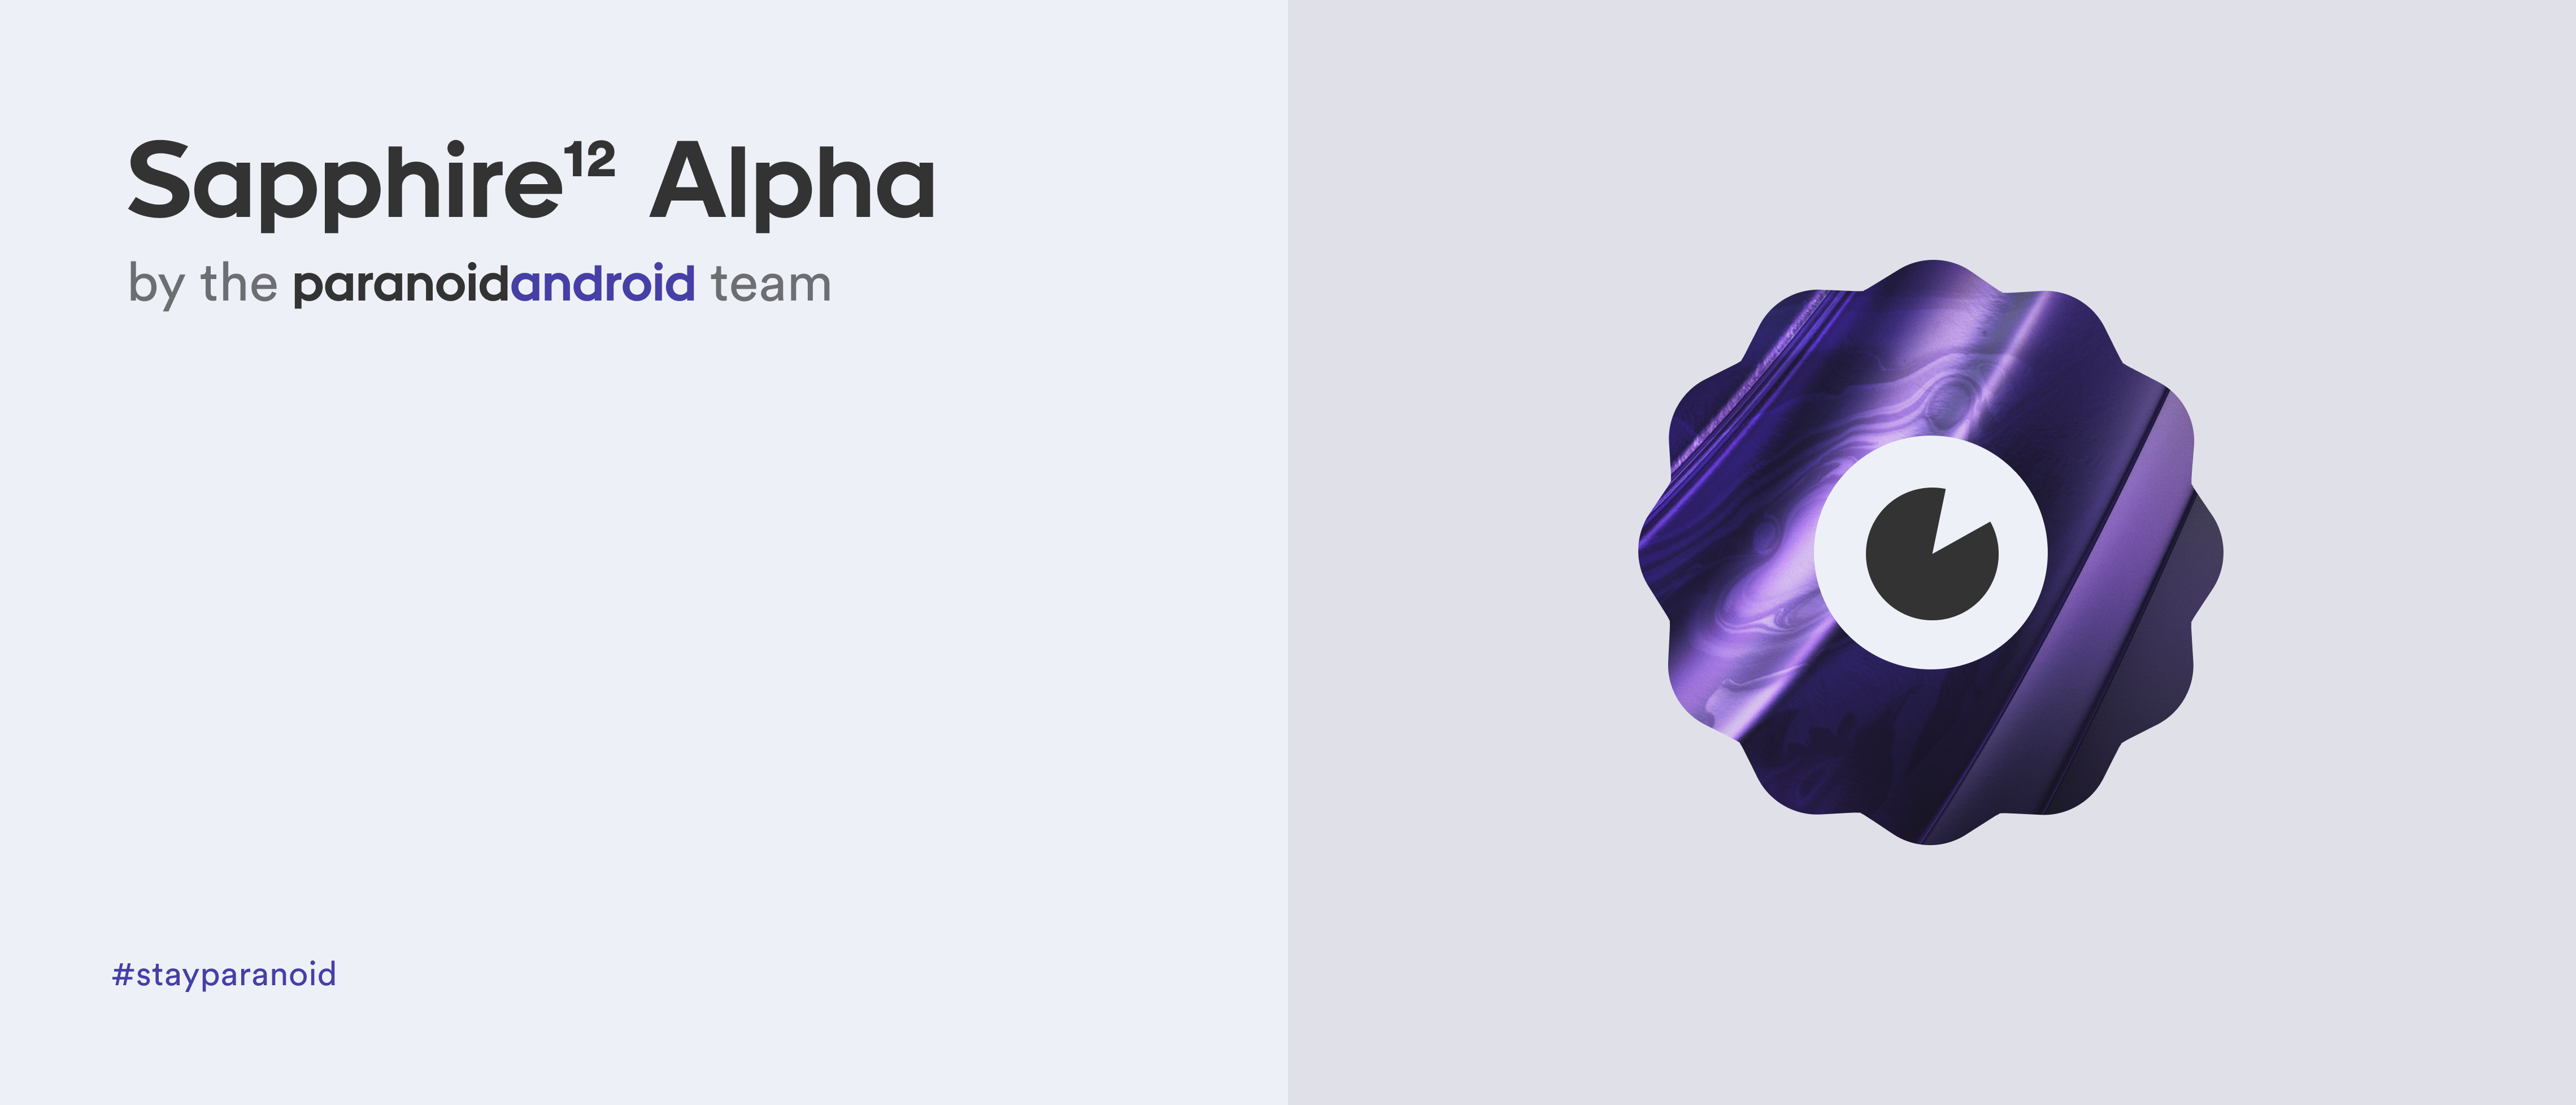 image of the sapphire alpha logo on grey background